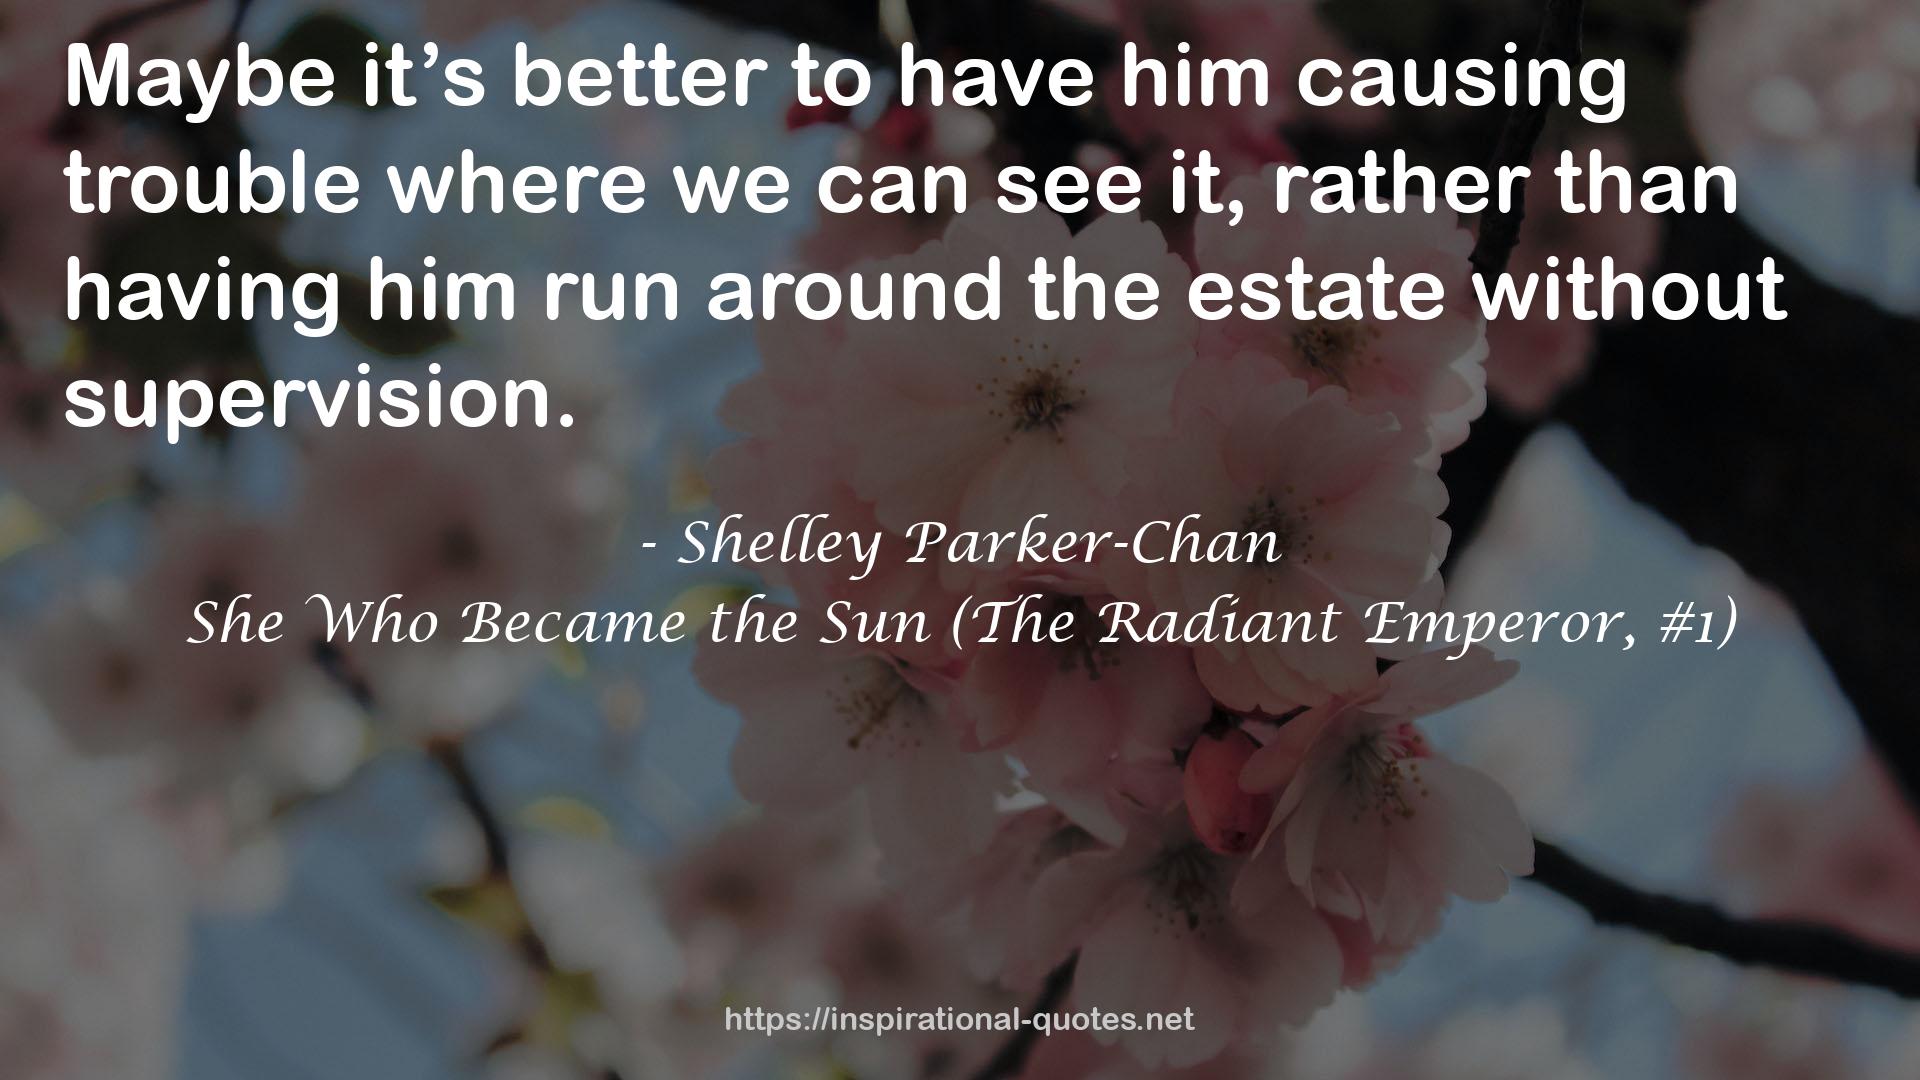 She Who Became the Sun (The Radiant Emperor, #1) QUOTES